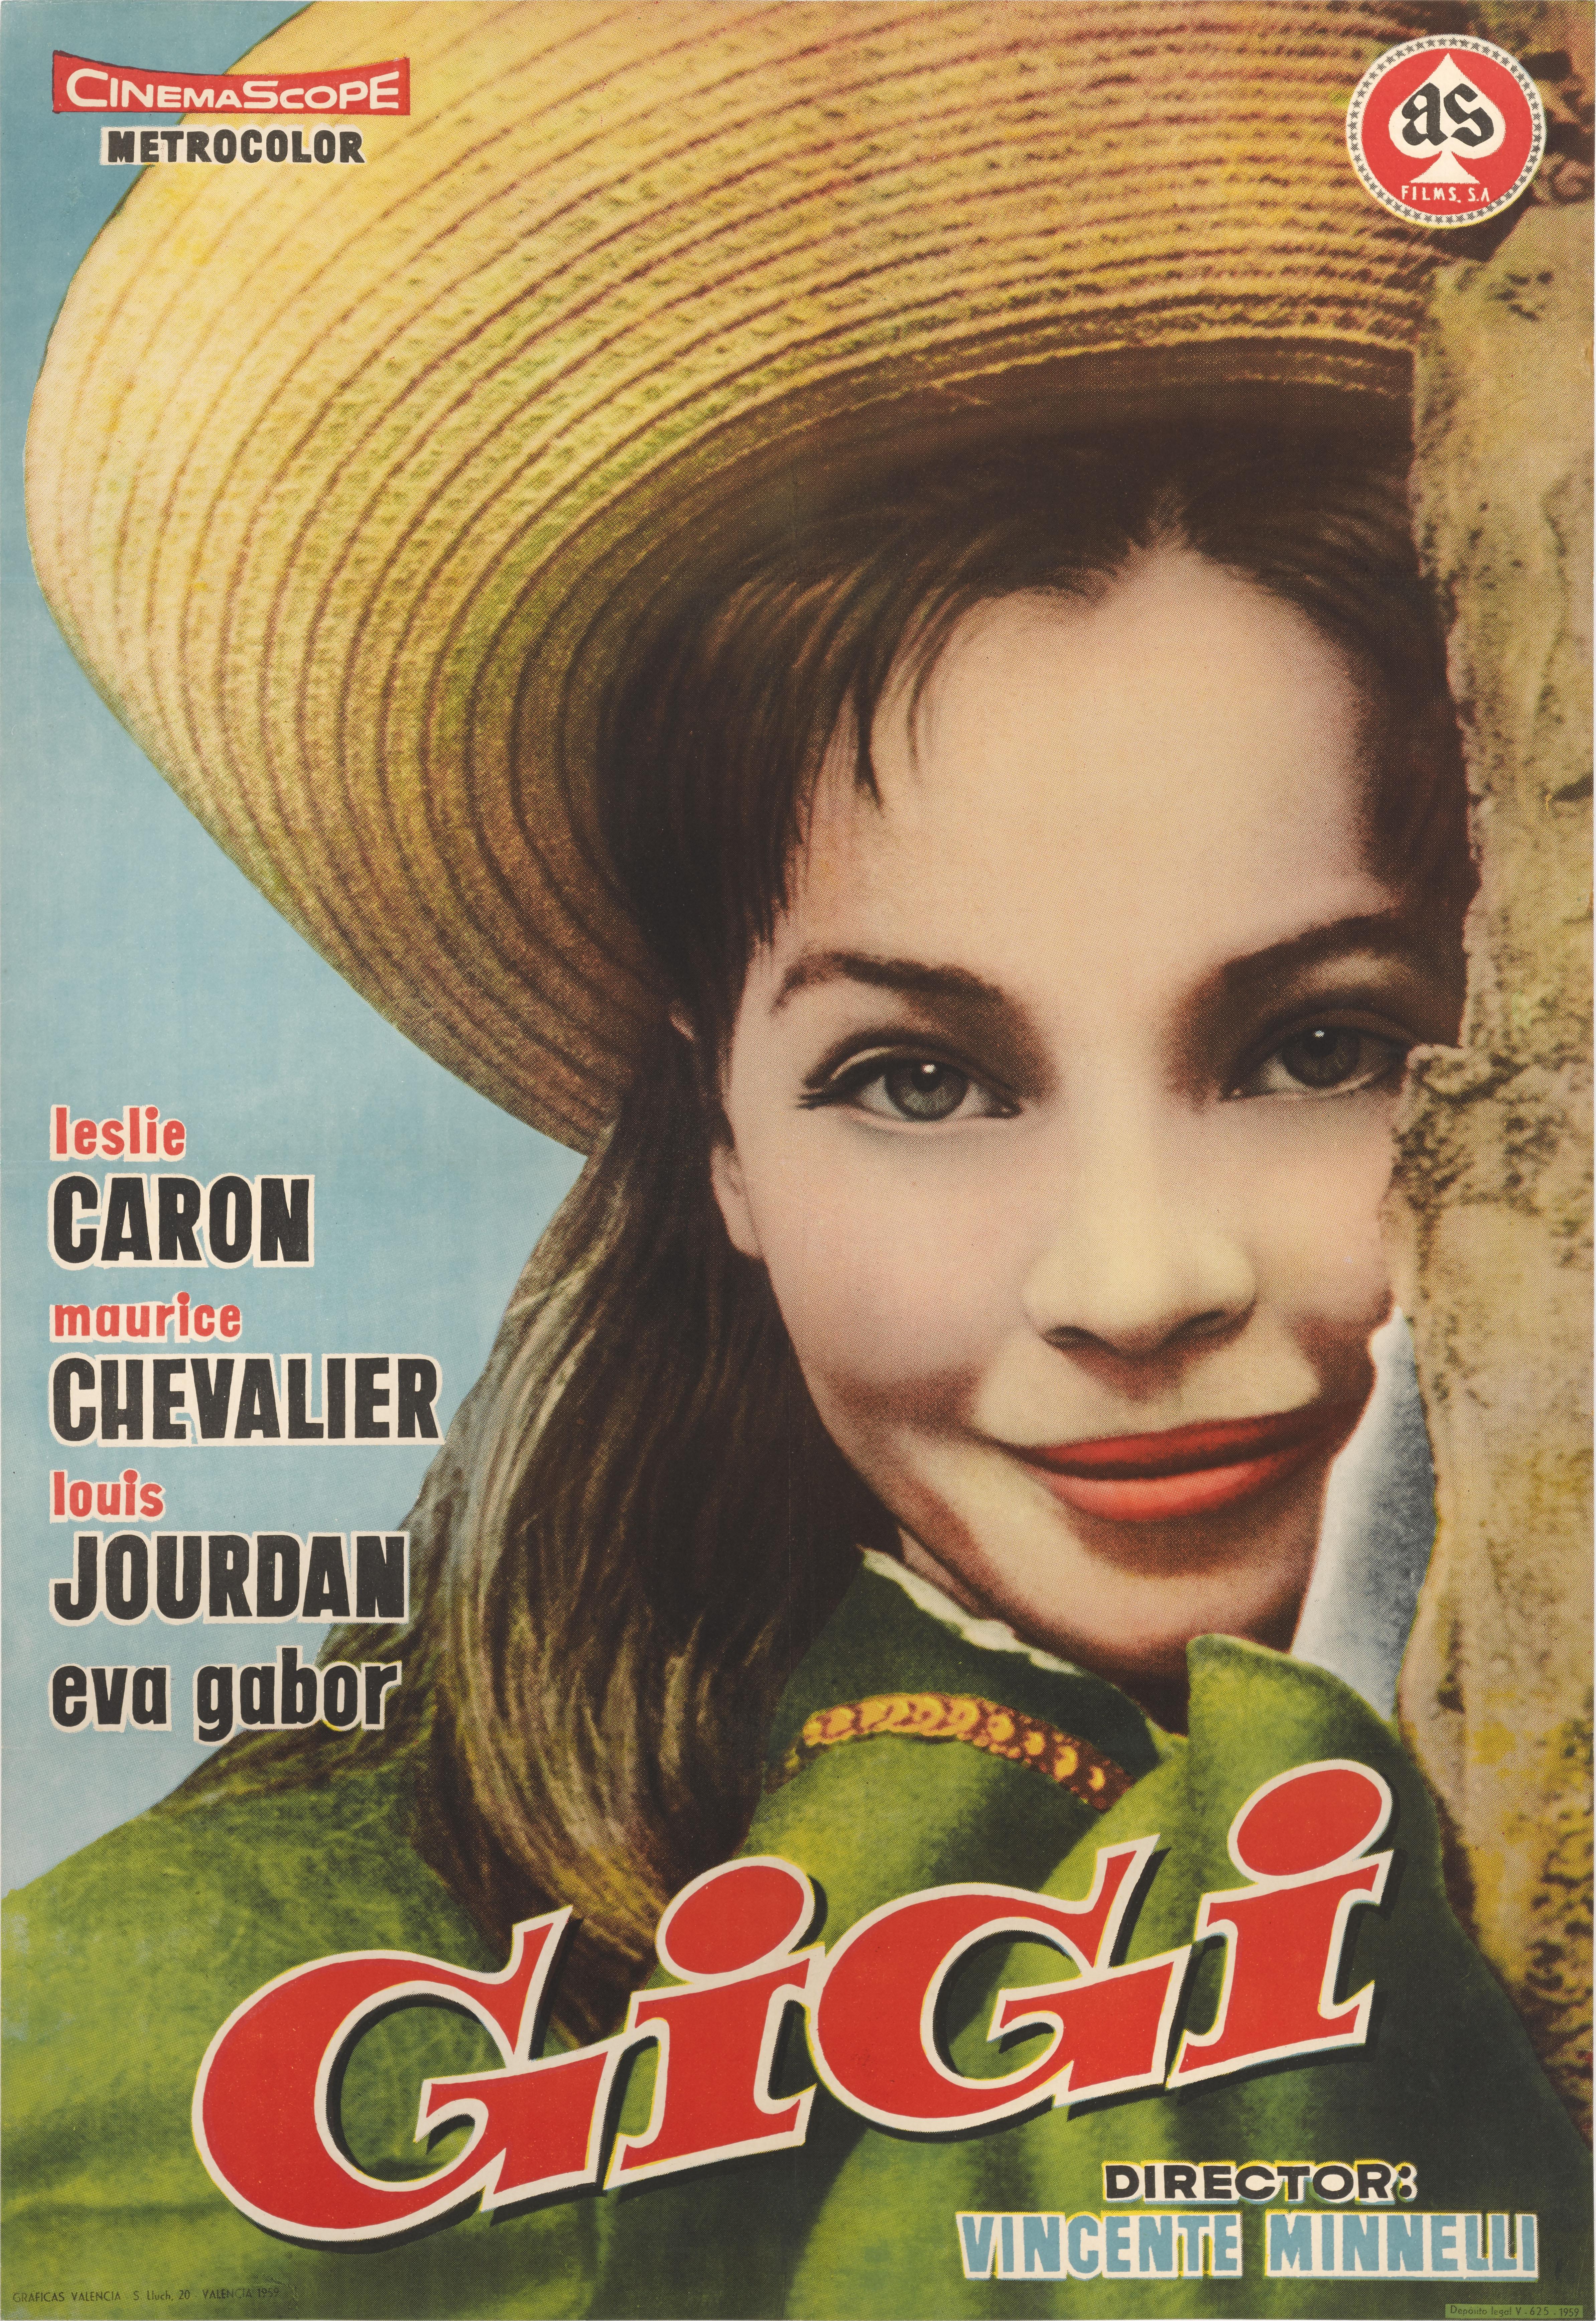 Original Spanish film poster for the American romantic musical romantic comedy directed by Vincente Minnelli and starring Leslie Caron, Maurice Chevalier and Louis Jourdan. 
This poster is conservation linen backed and it would be shipped by